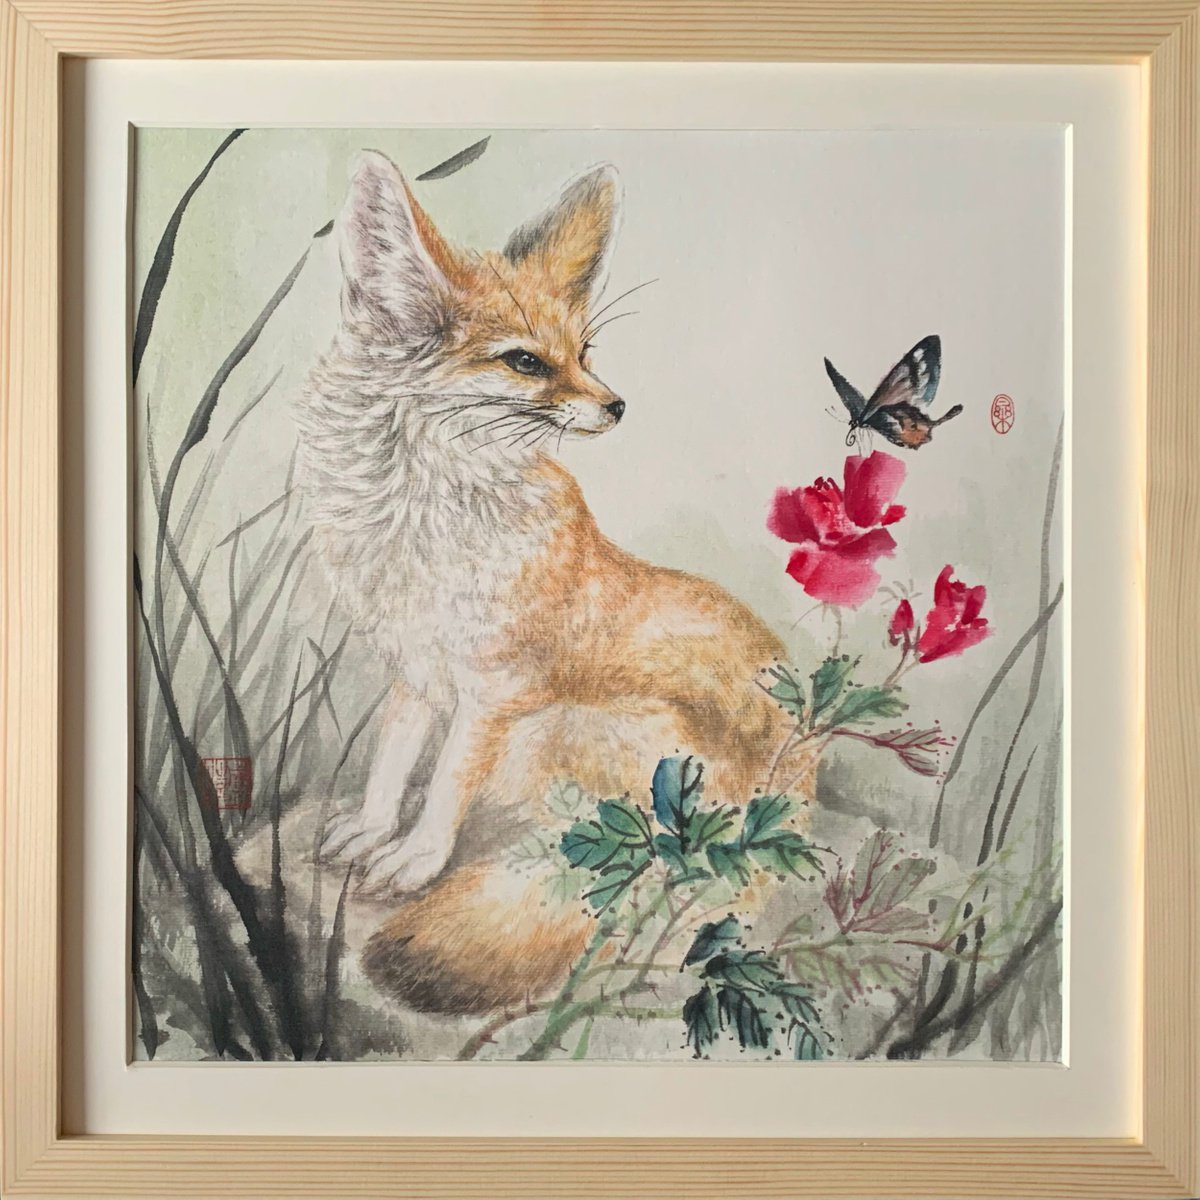 Original Ink Brush Painting, Framed Wall Art, Fennec Fox & Roses by Fiona Sheng